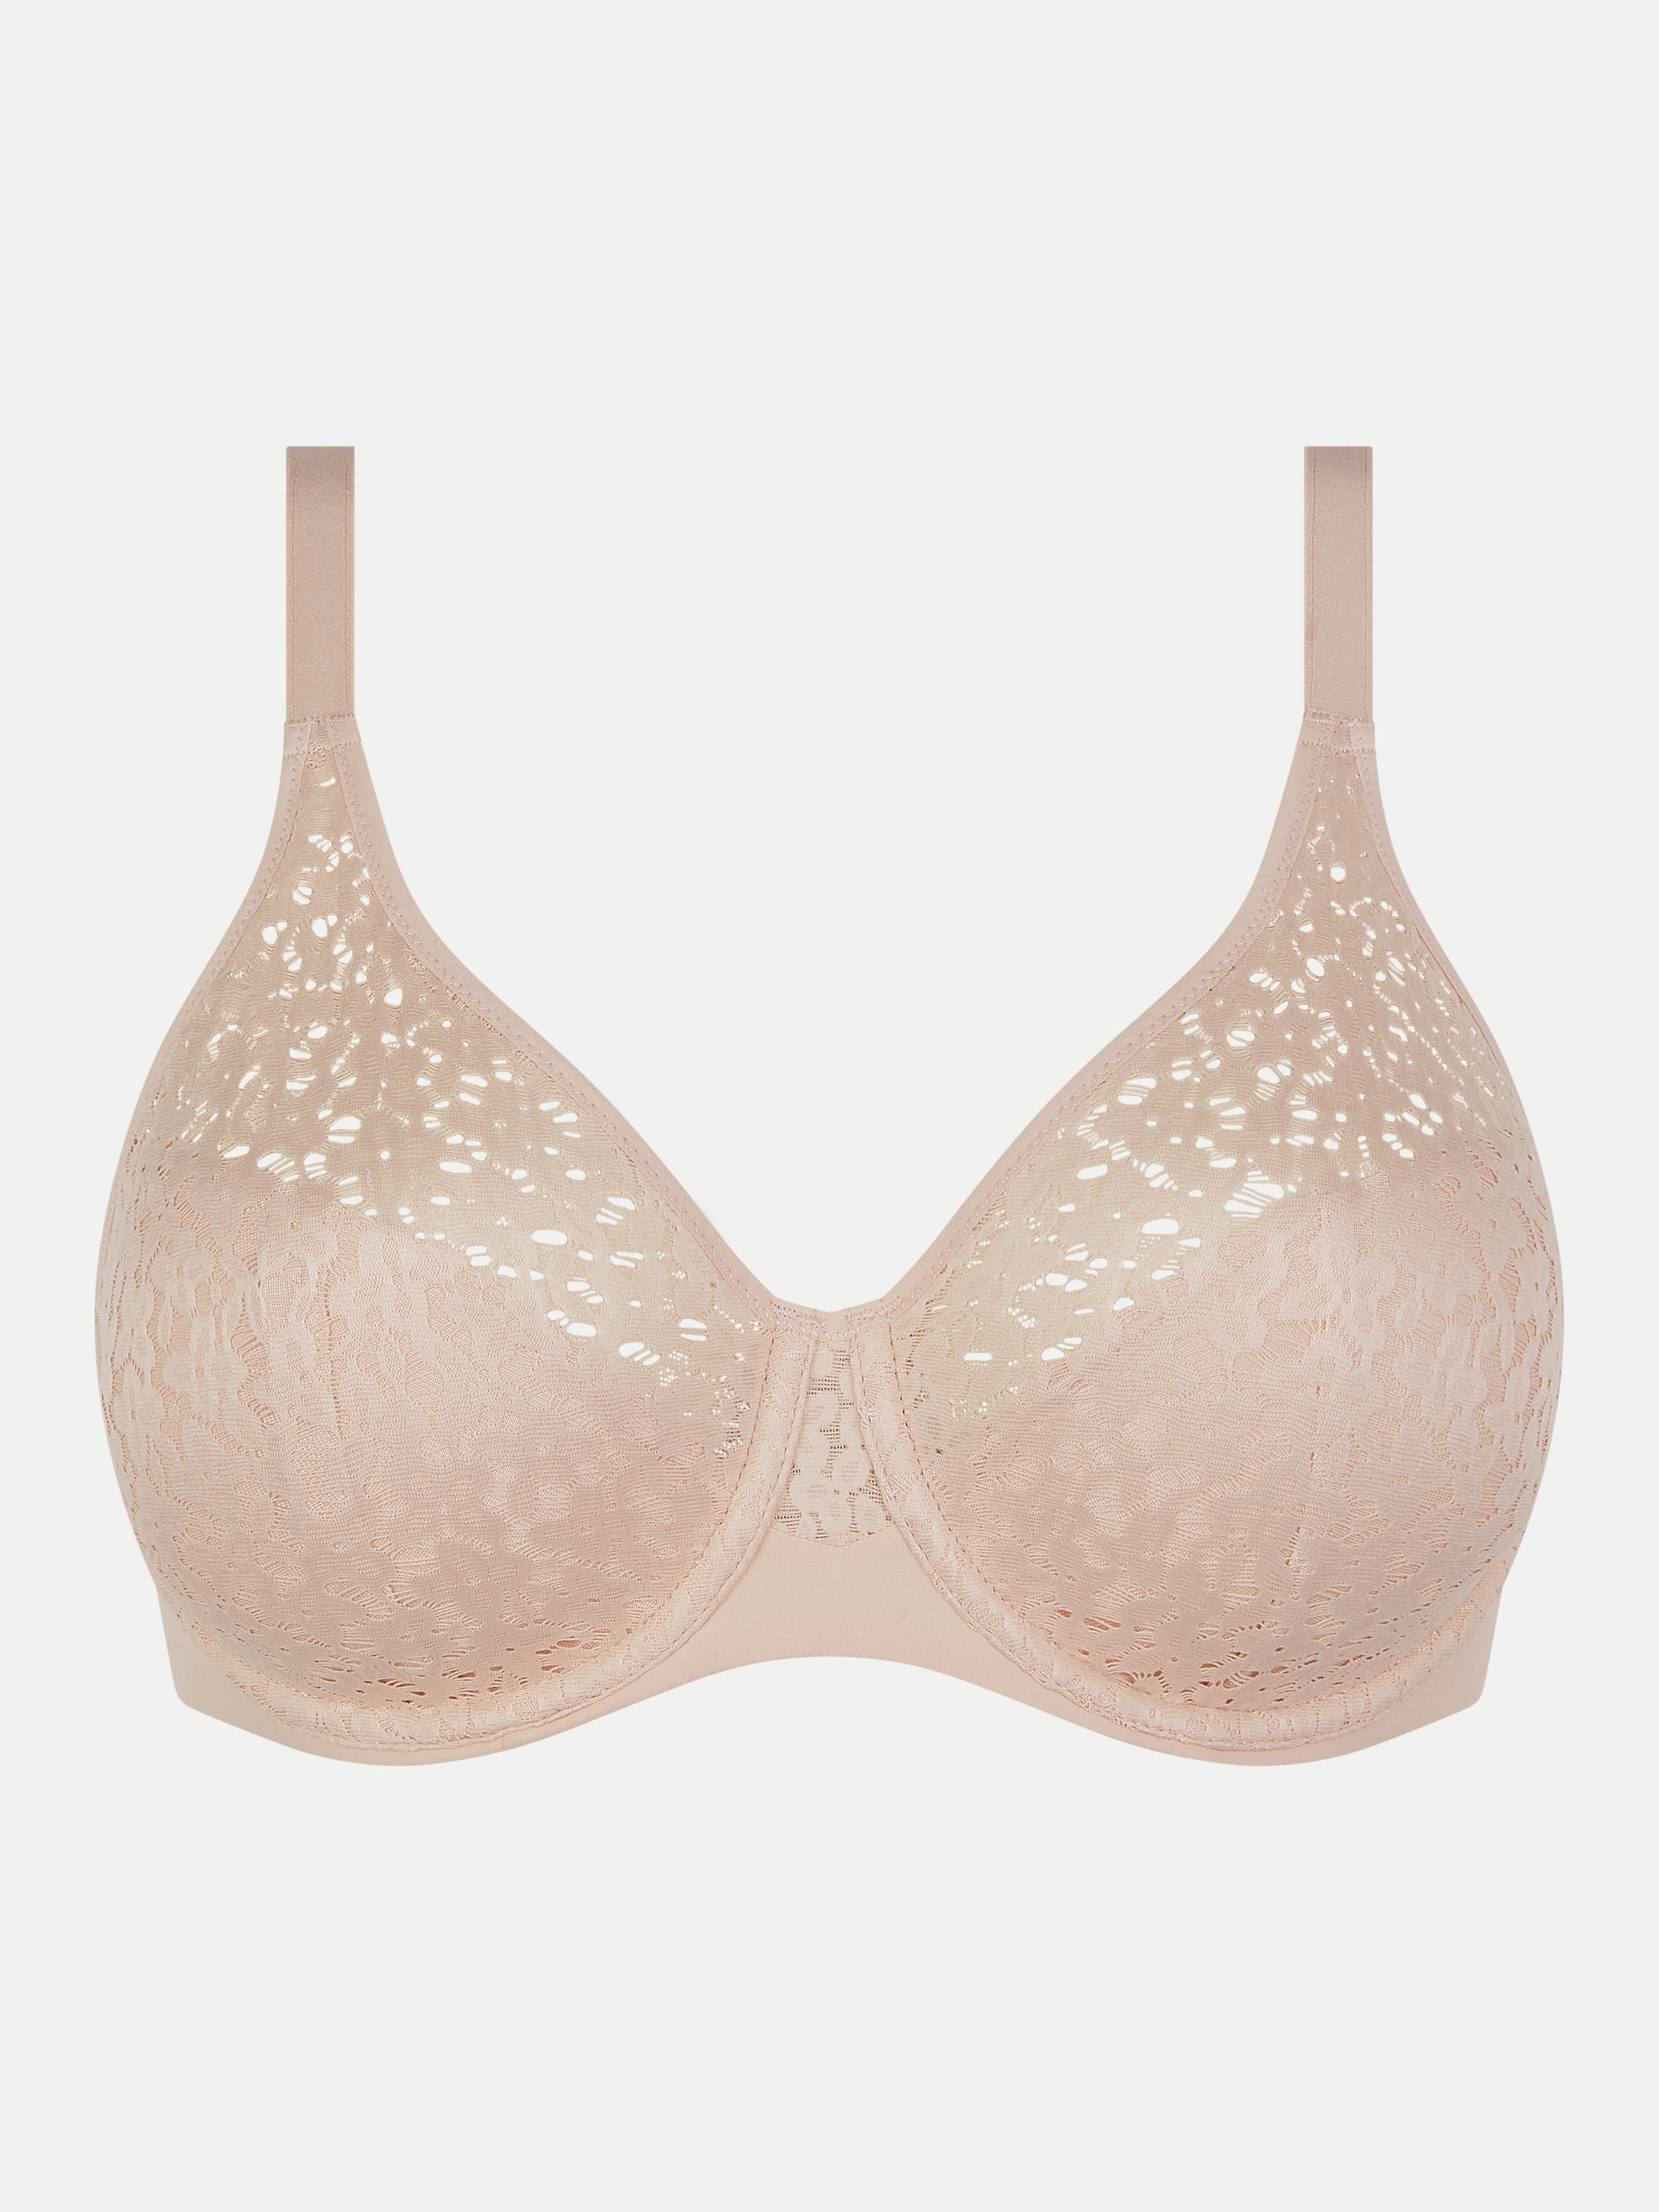 Buy White Recycled Lace Full Cup Comfort Bra - 40D, Bras